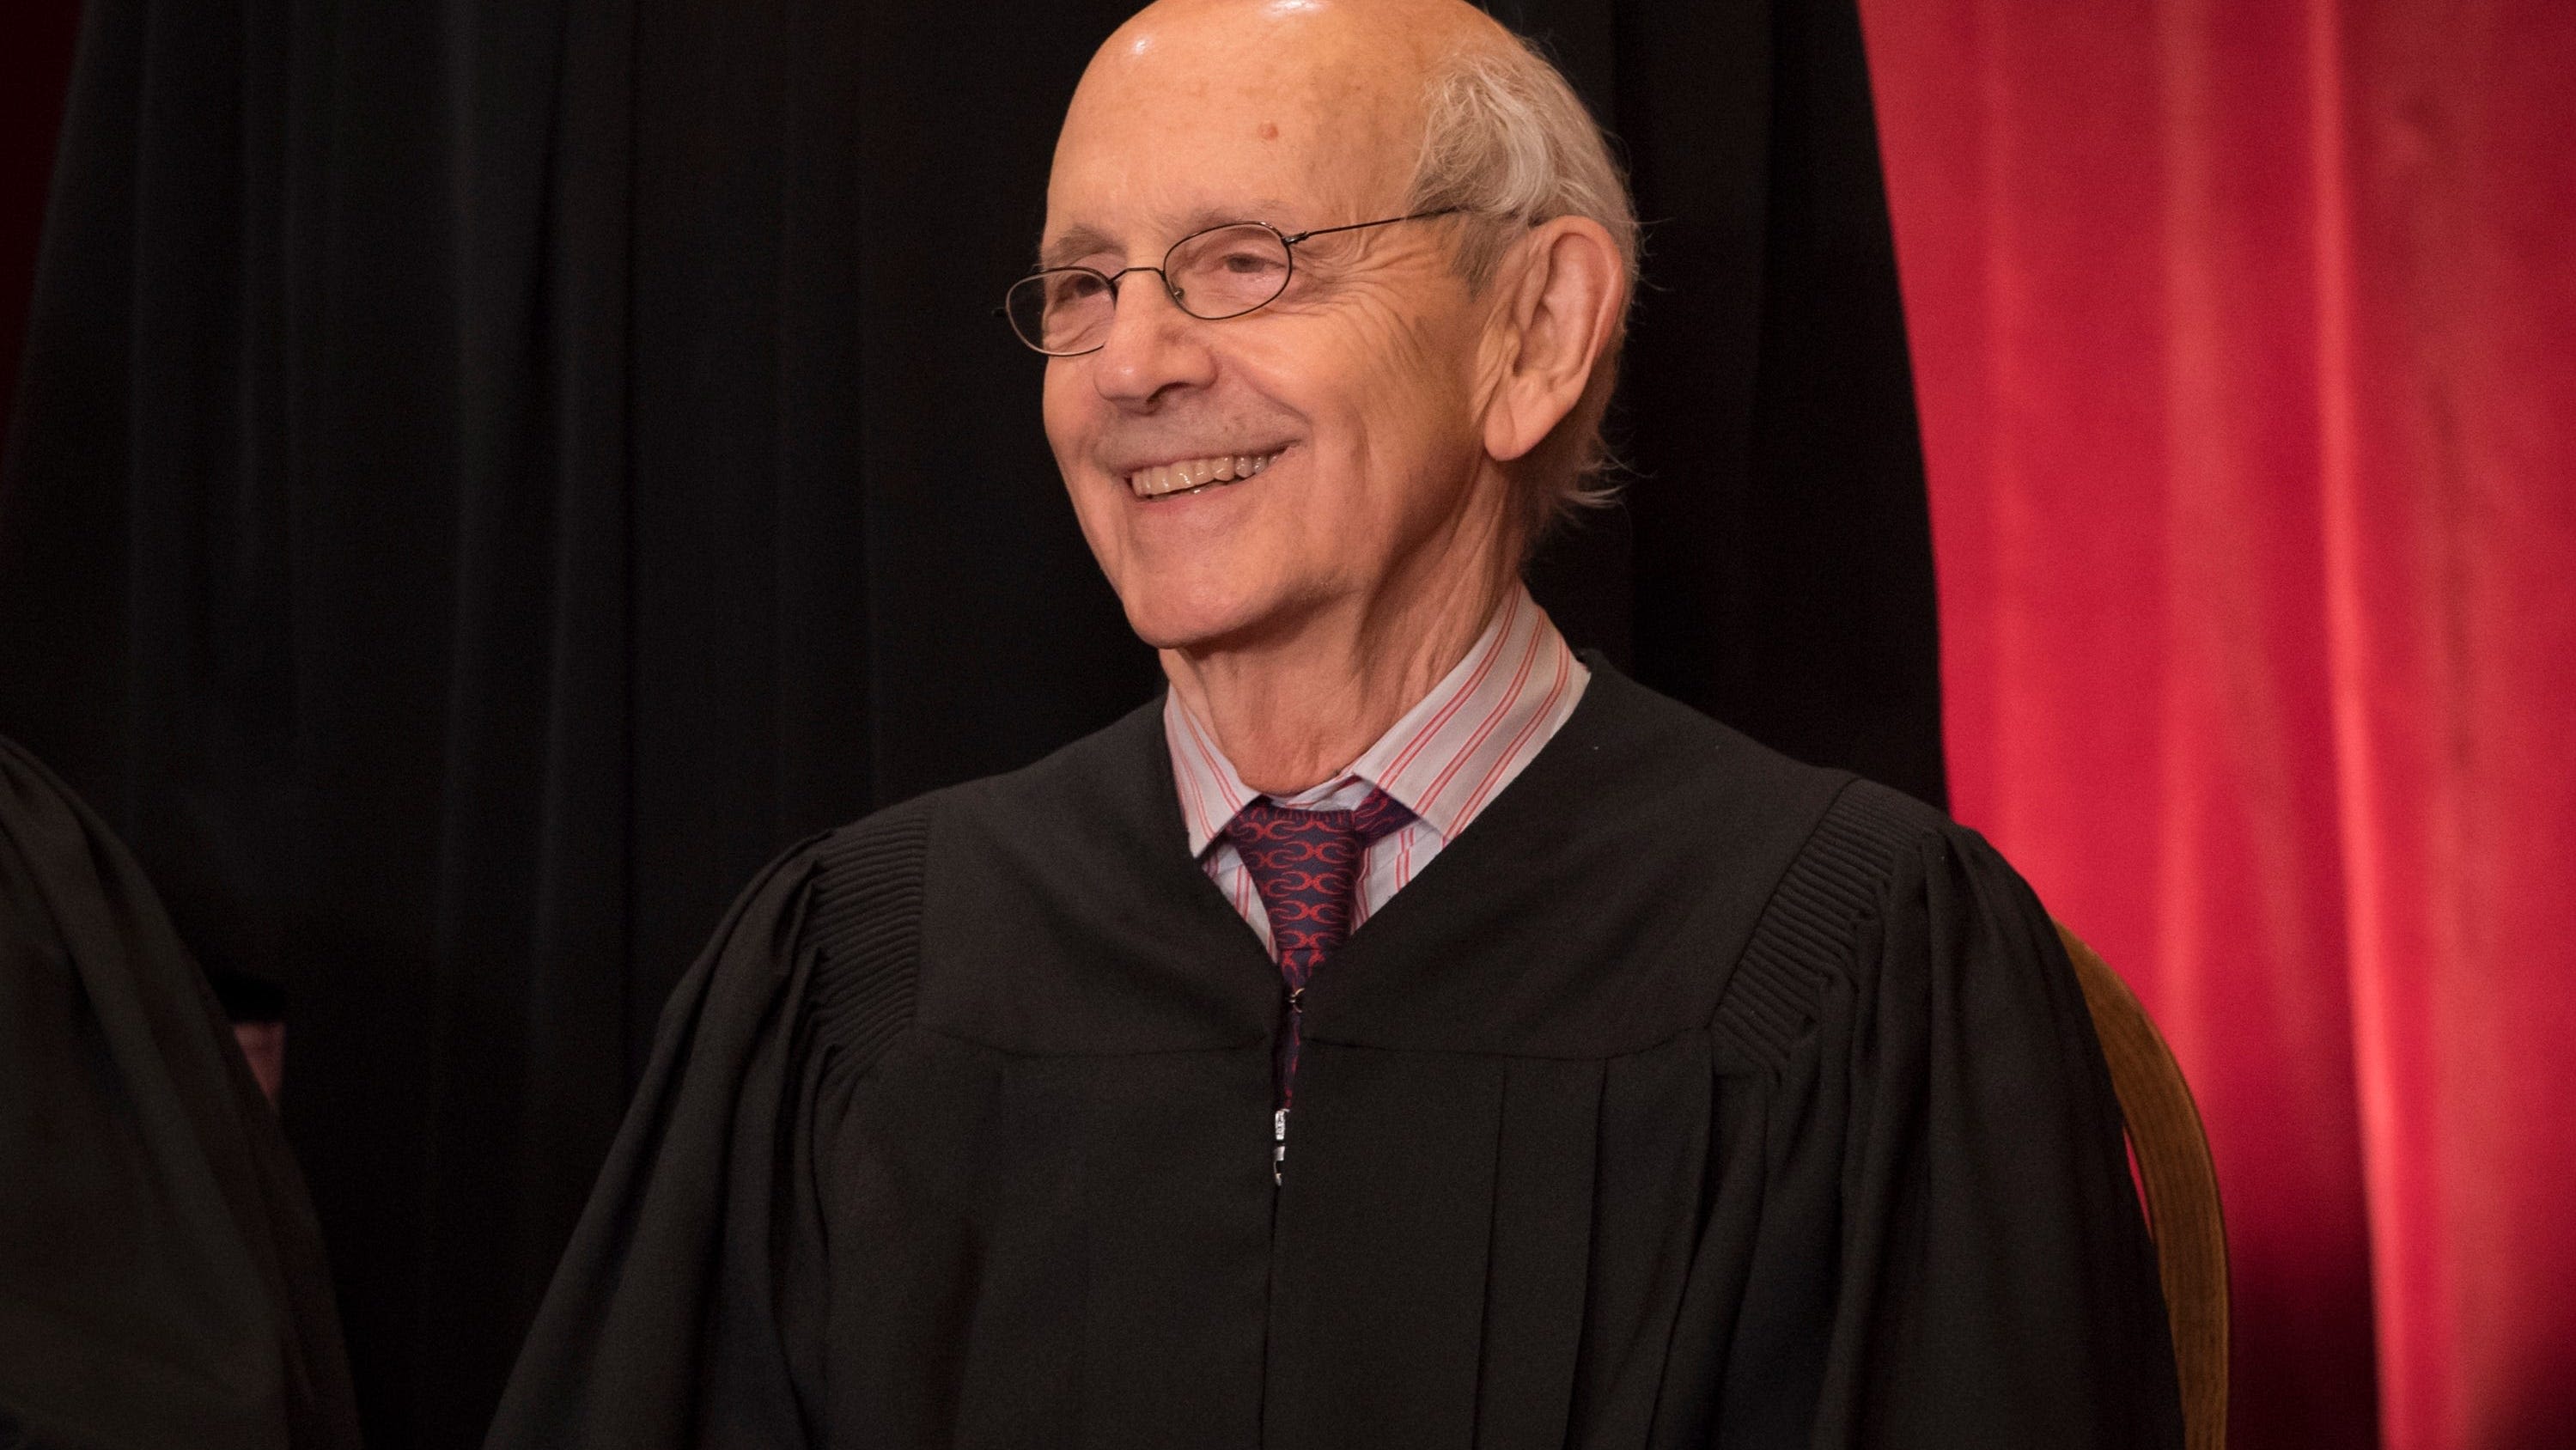 'Of course': Former Justice Stephen Breyer says Supreme Court worries about drop in trust